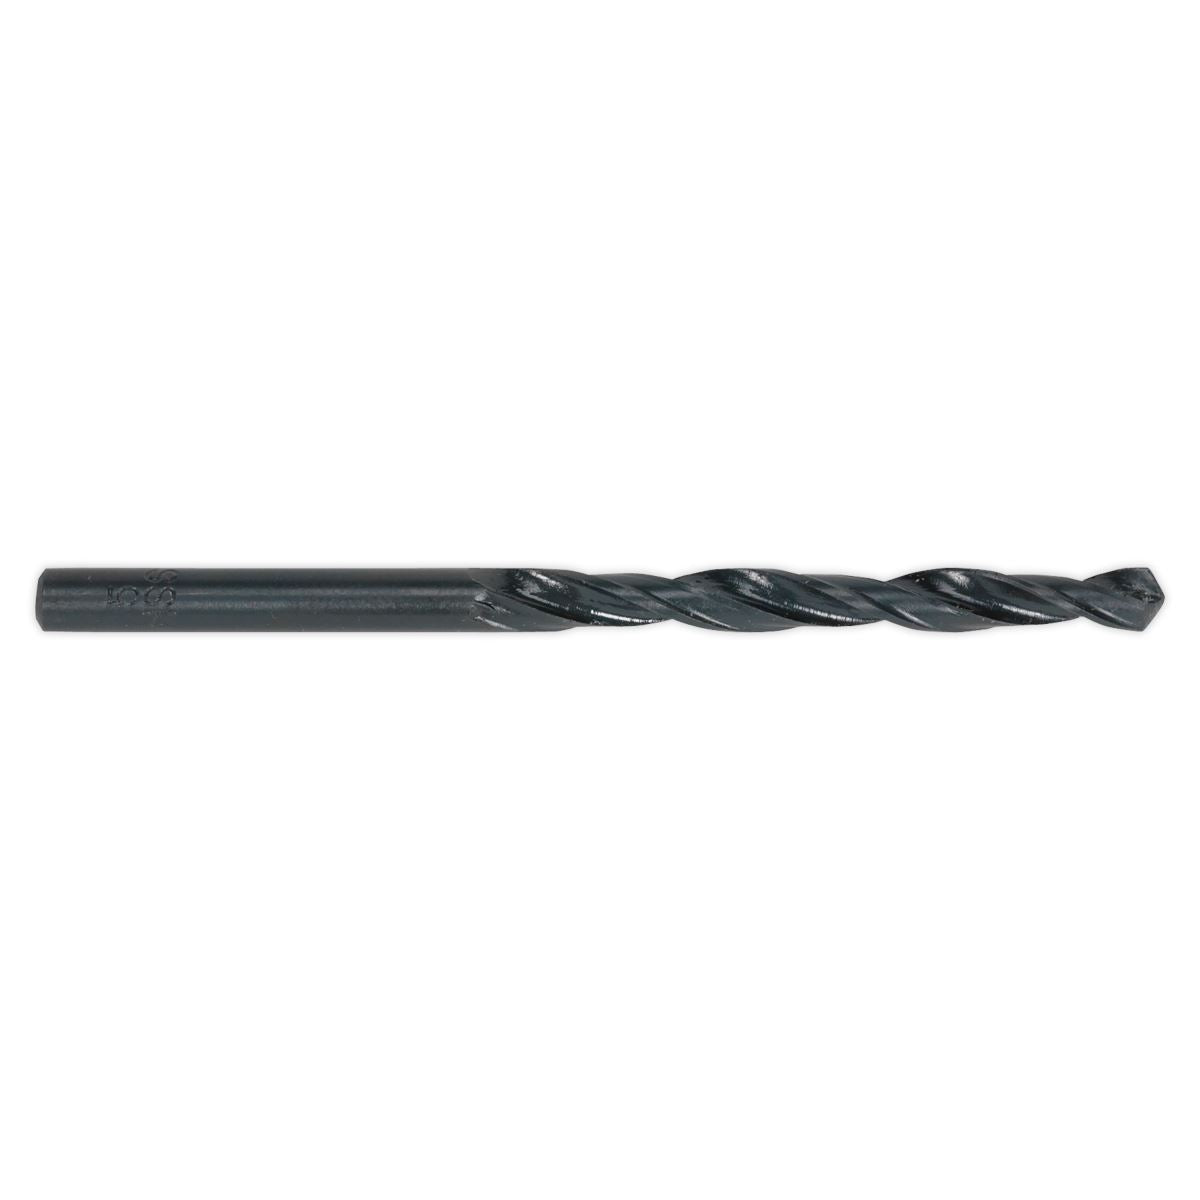 Sealey HSS Roll Forged Drill Bit Ø10.5mm Pack of 5